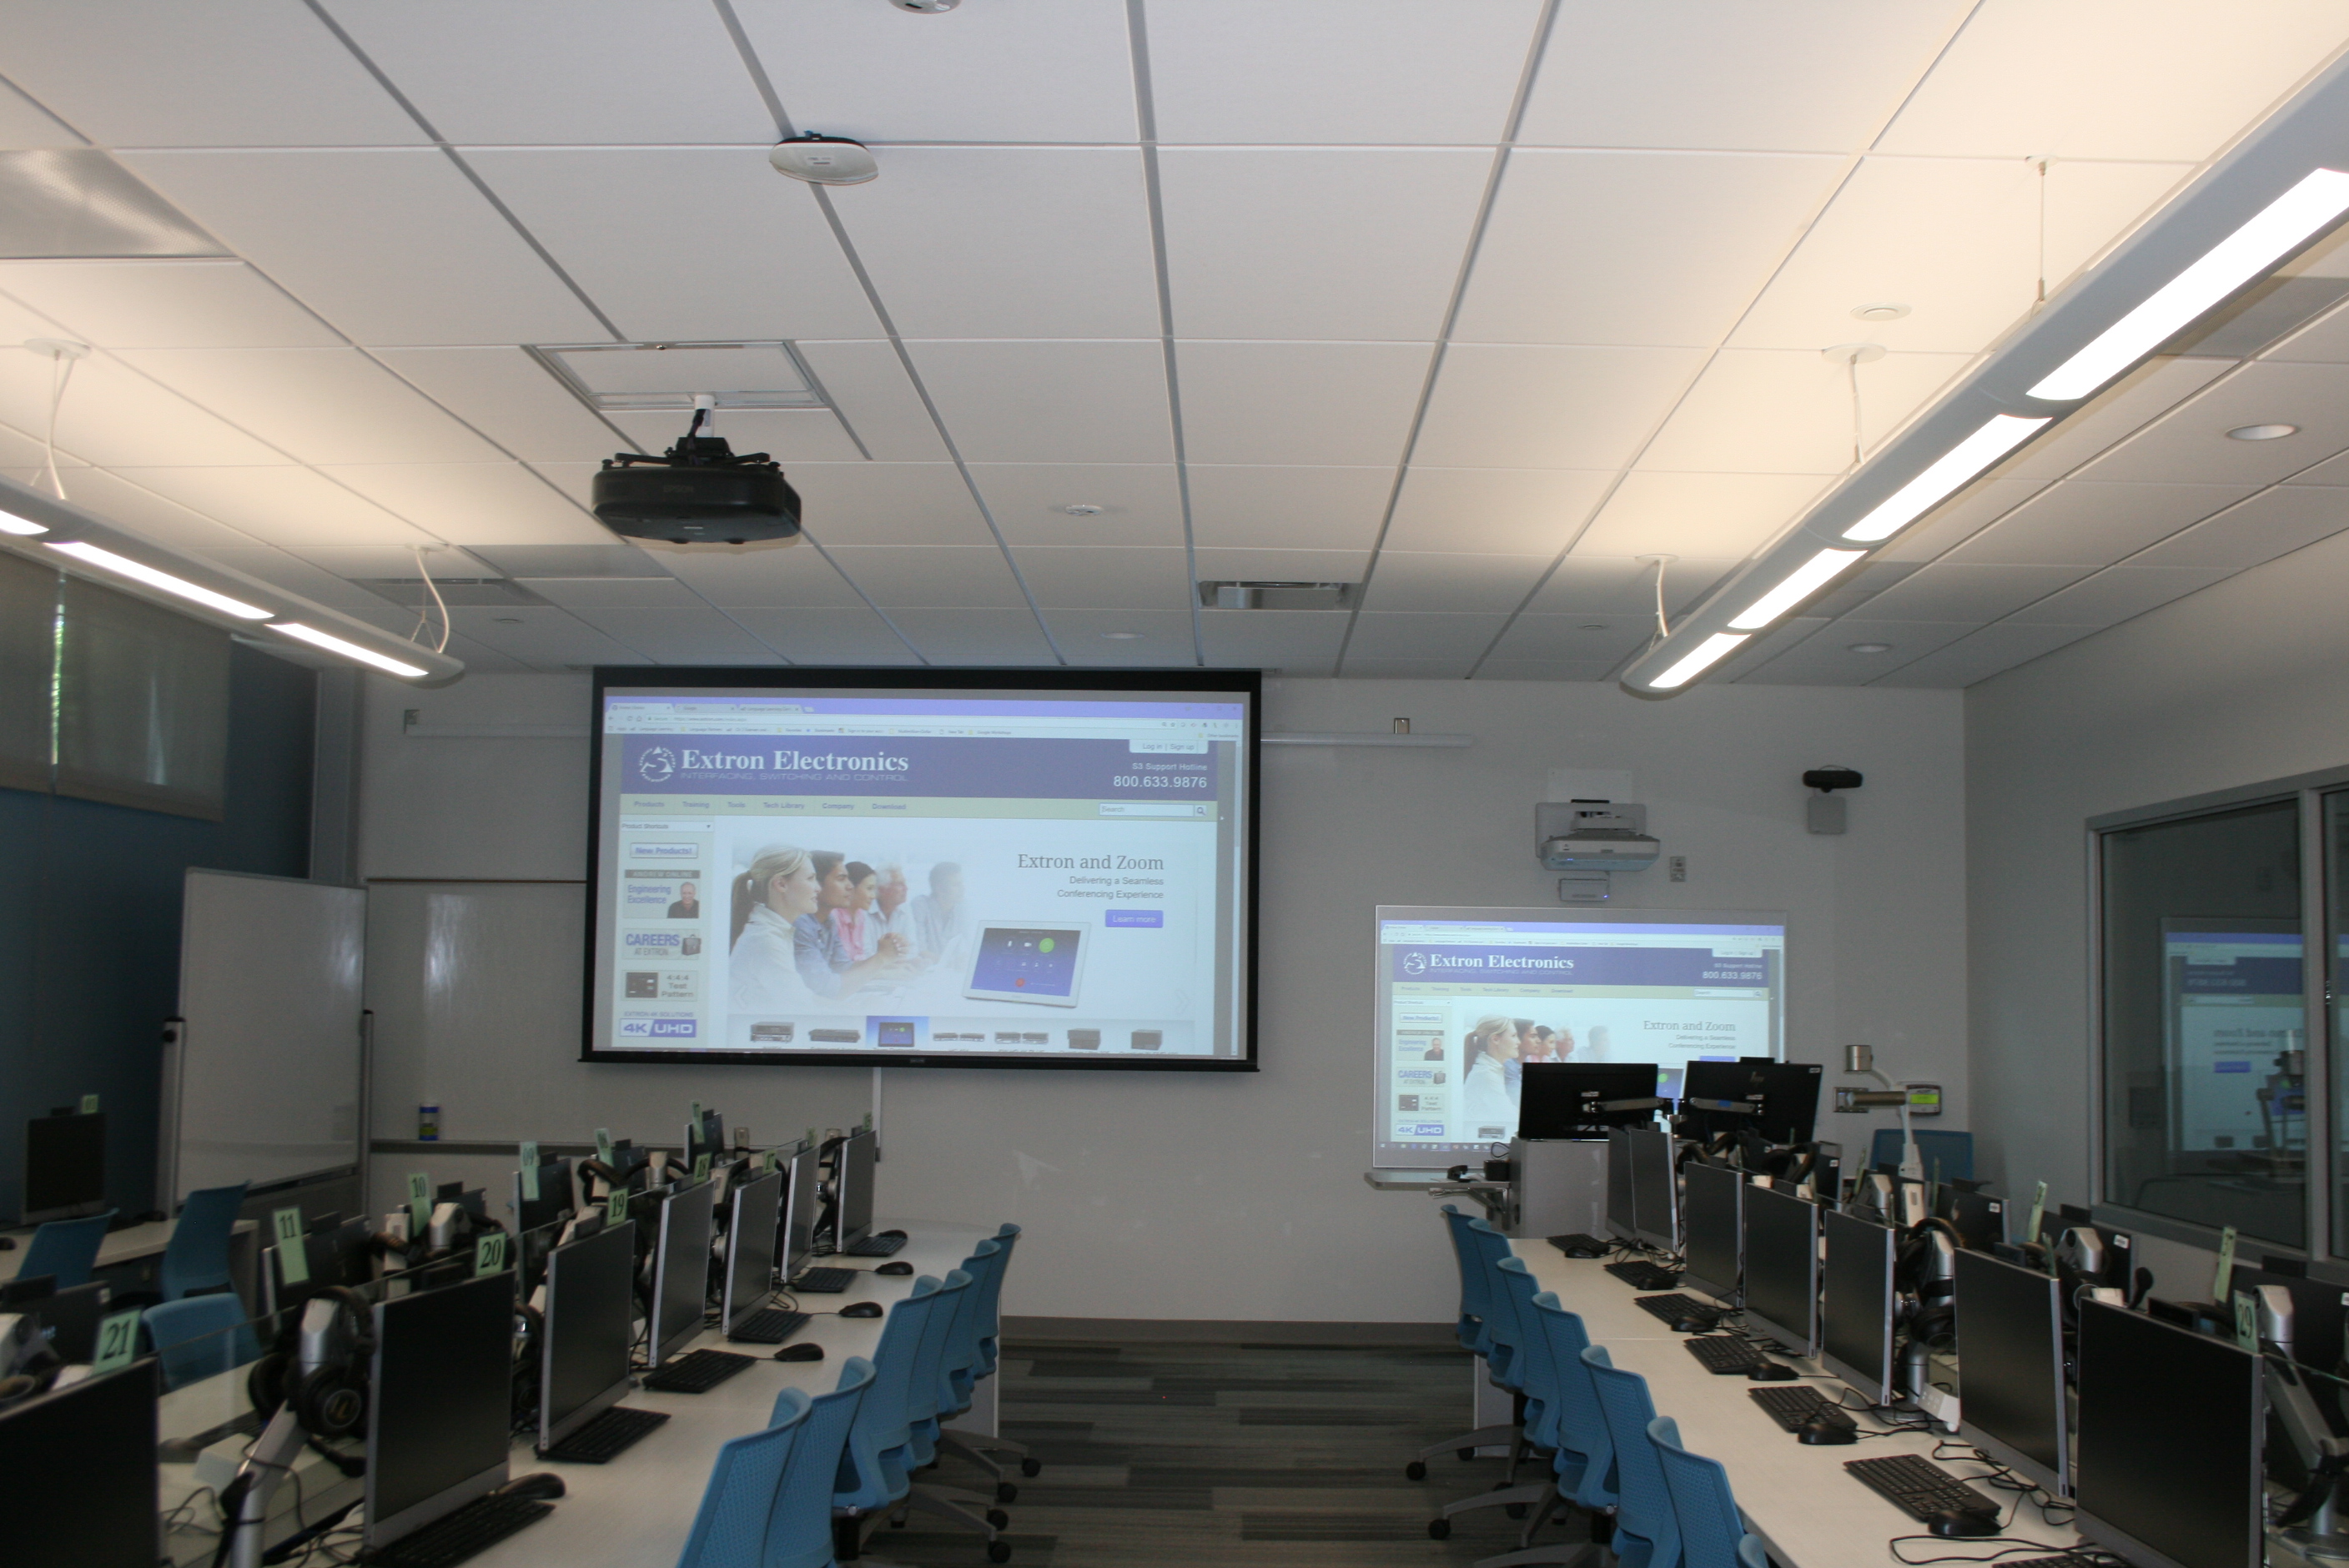 Classroom with a projection screen in front and to the side of the whiteboard